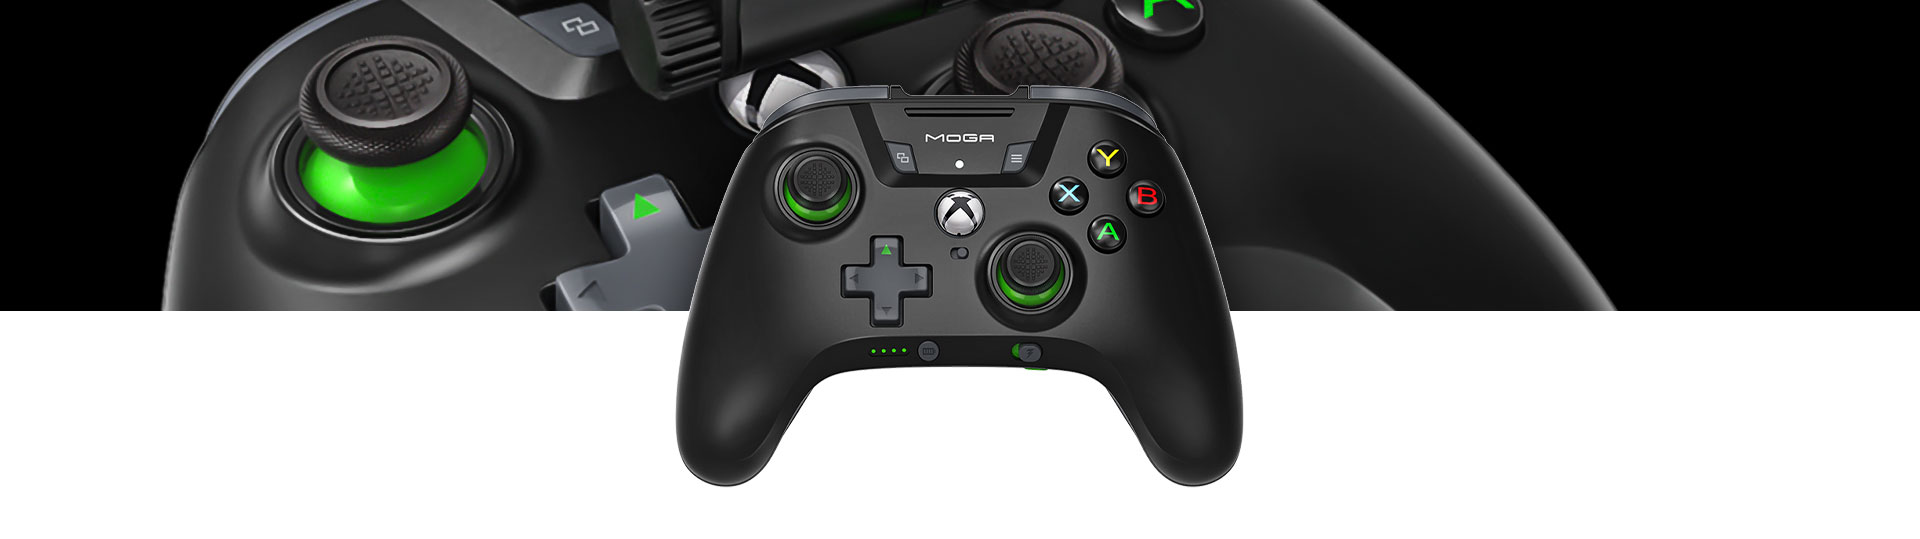 MOGA XP5-X Plus Bluetooth Controller for Mobile & Cloud Gaming  with a closeup of controller surface texture